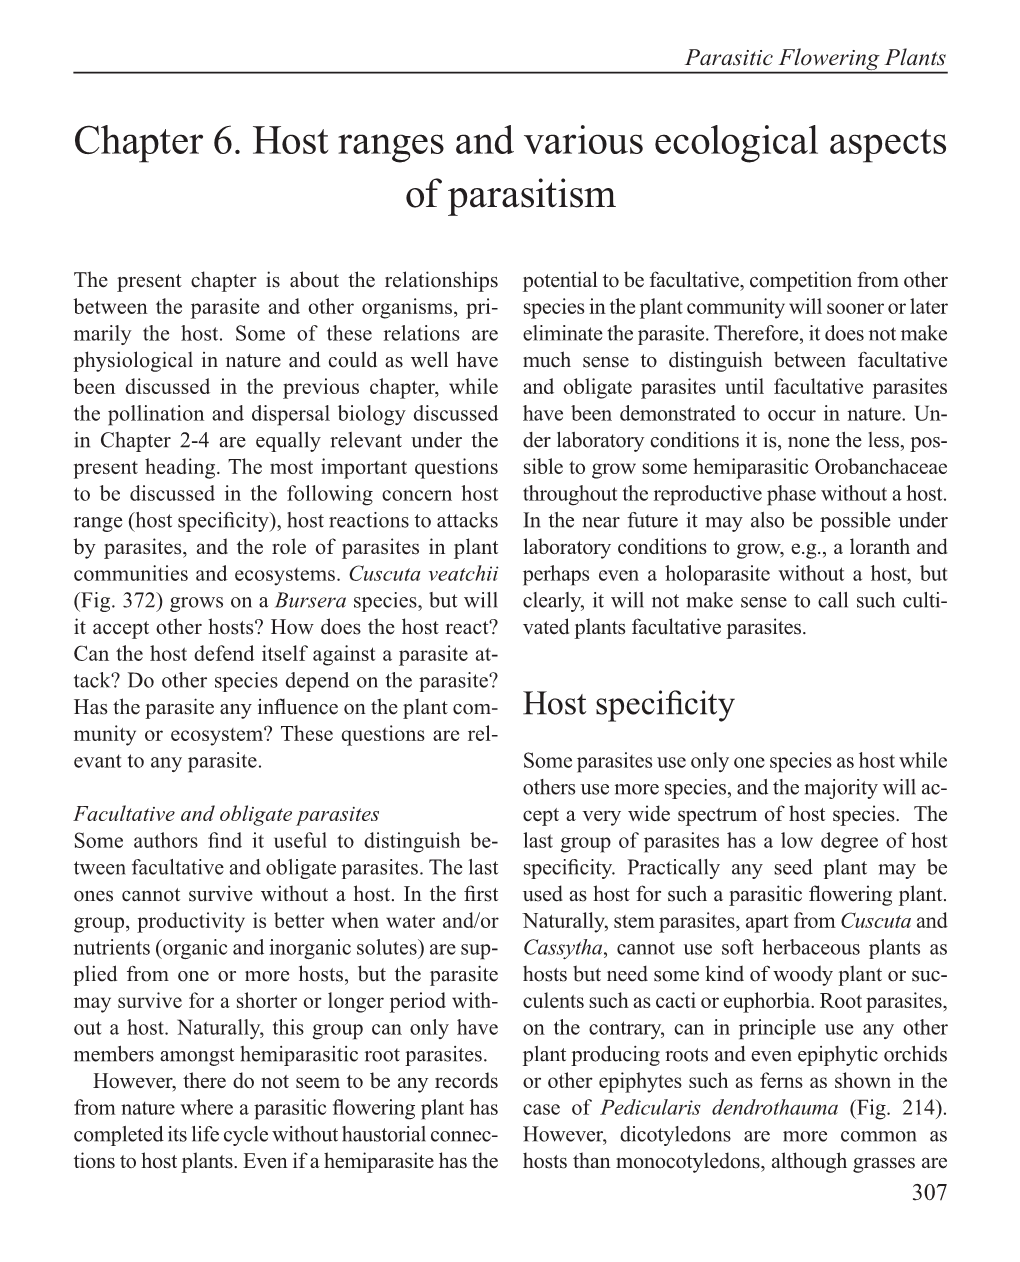 Chapter 6. Host Ranges and Various Ecological Aspects of Parasitism